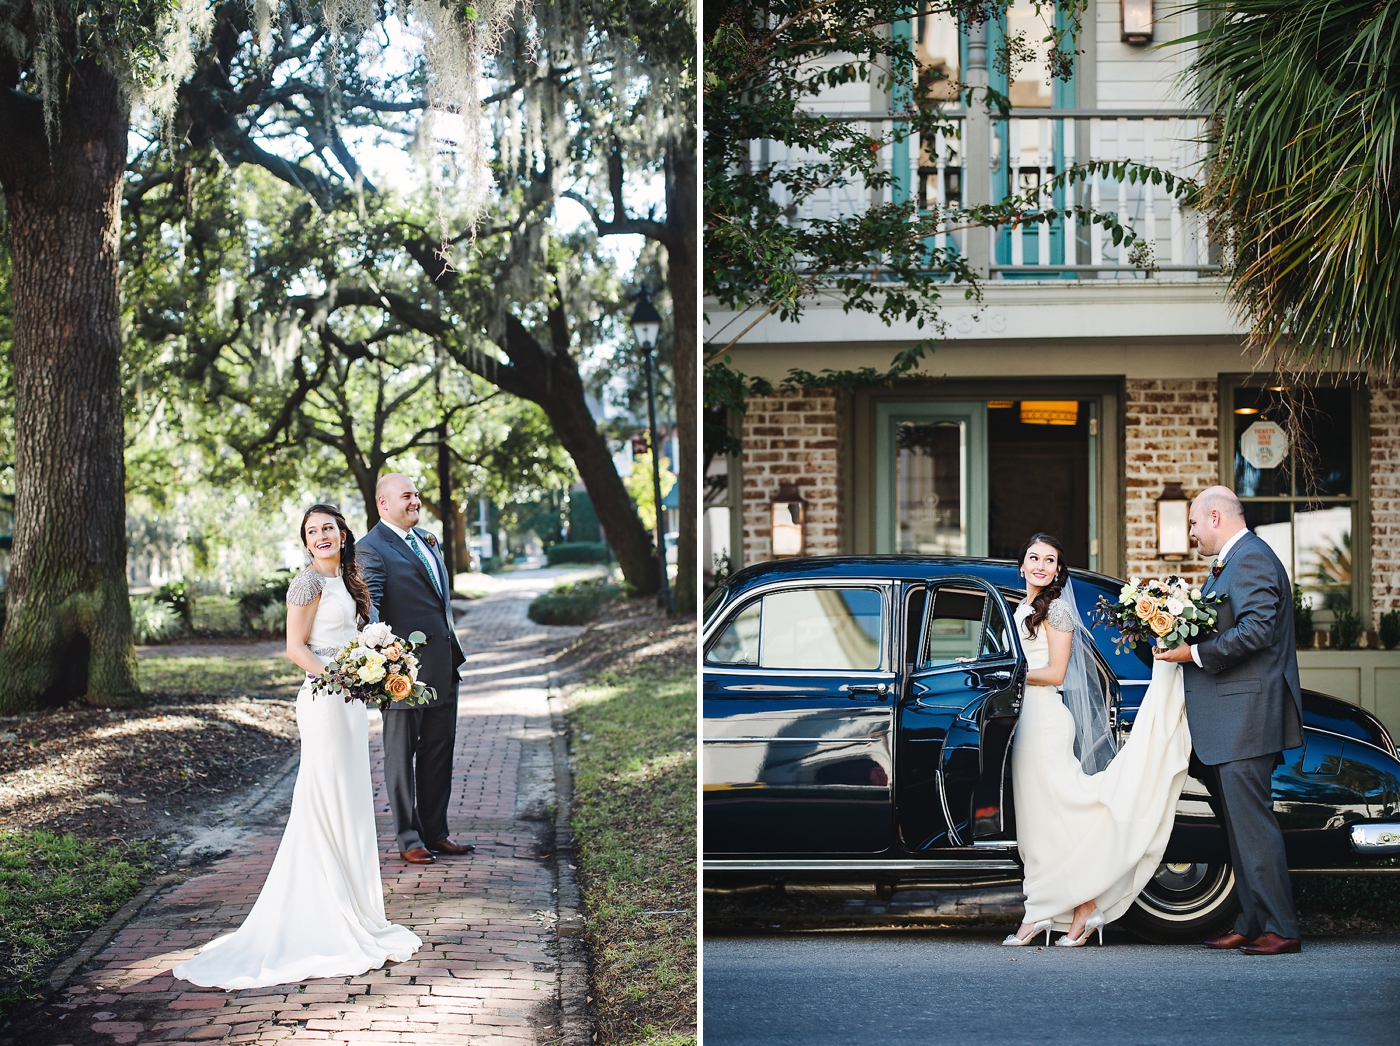 Lafayette Square Elopement in Savannah - Izzy and Co.